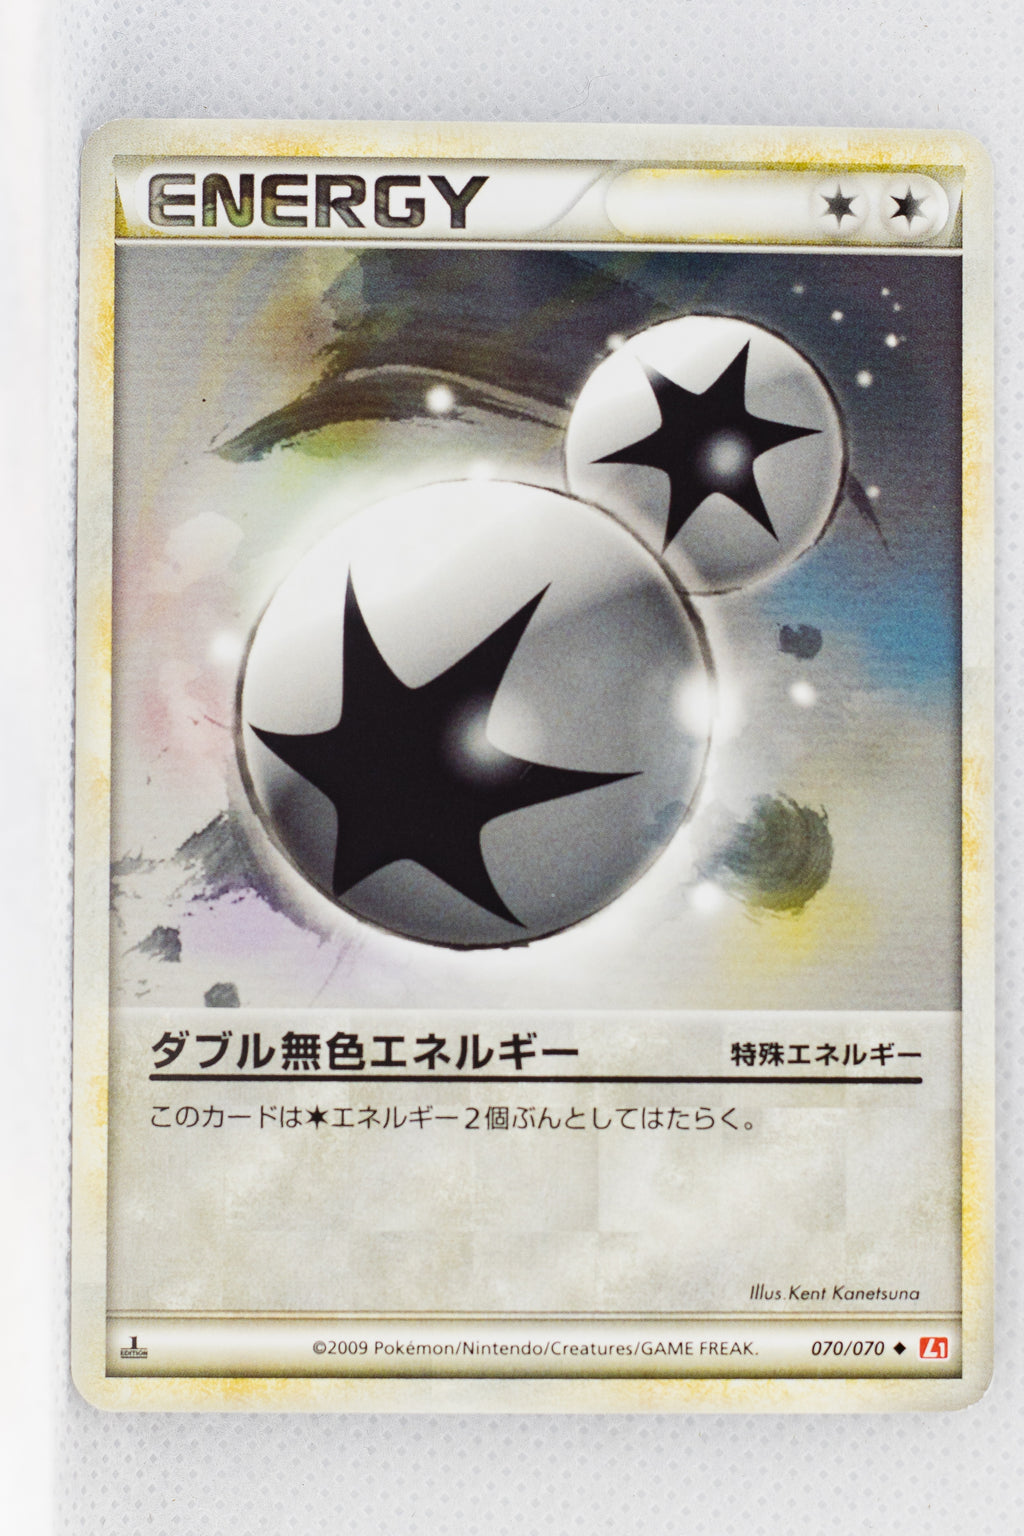 L1 Legend HeartGold 070/070 Double Colorless Energy 1st Edition